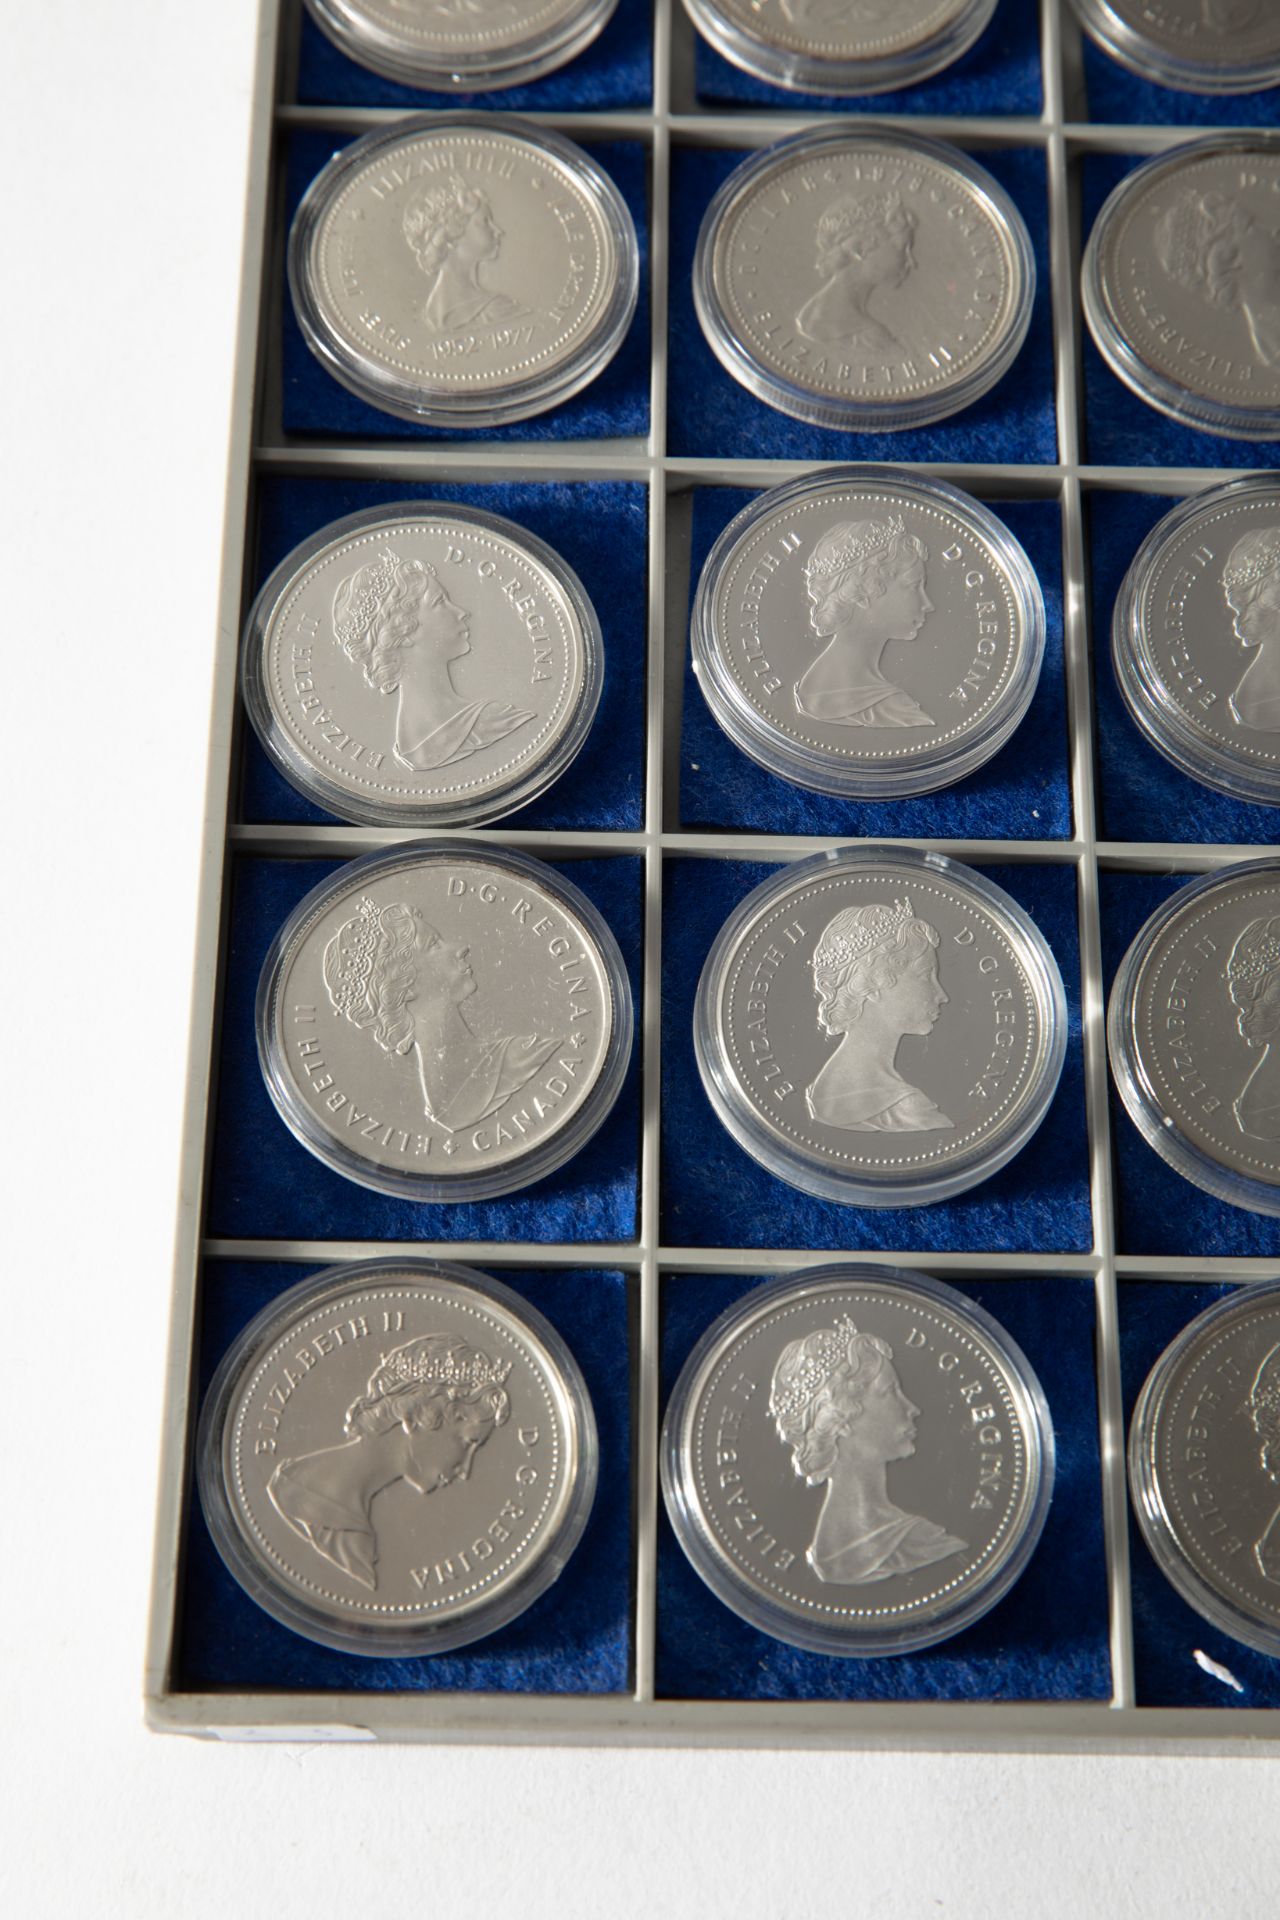 89 silver dollars Canada, 1949-2019 - Image 21 of 37